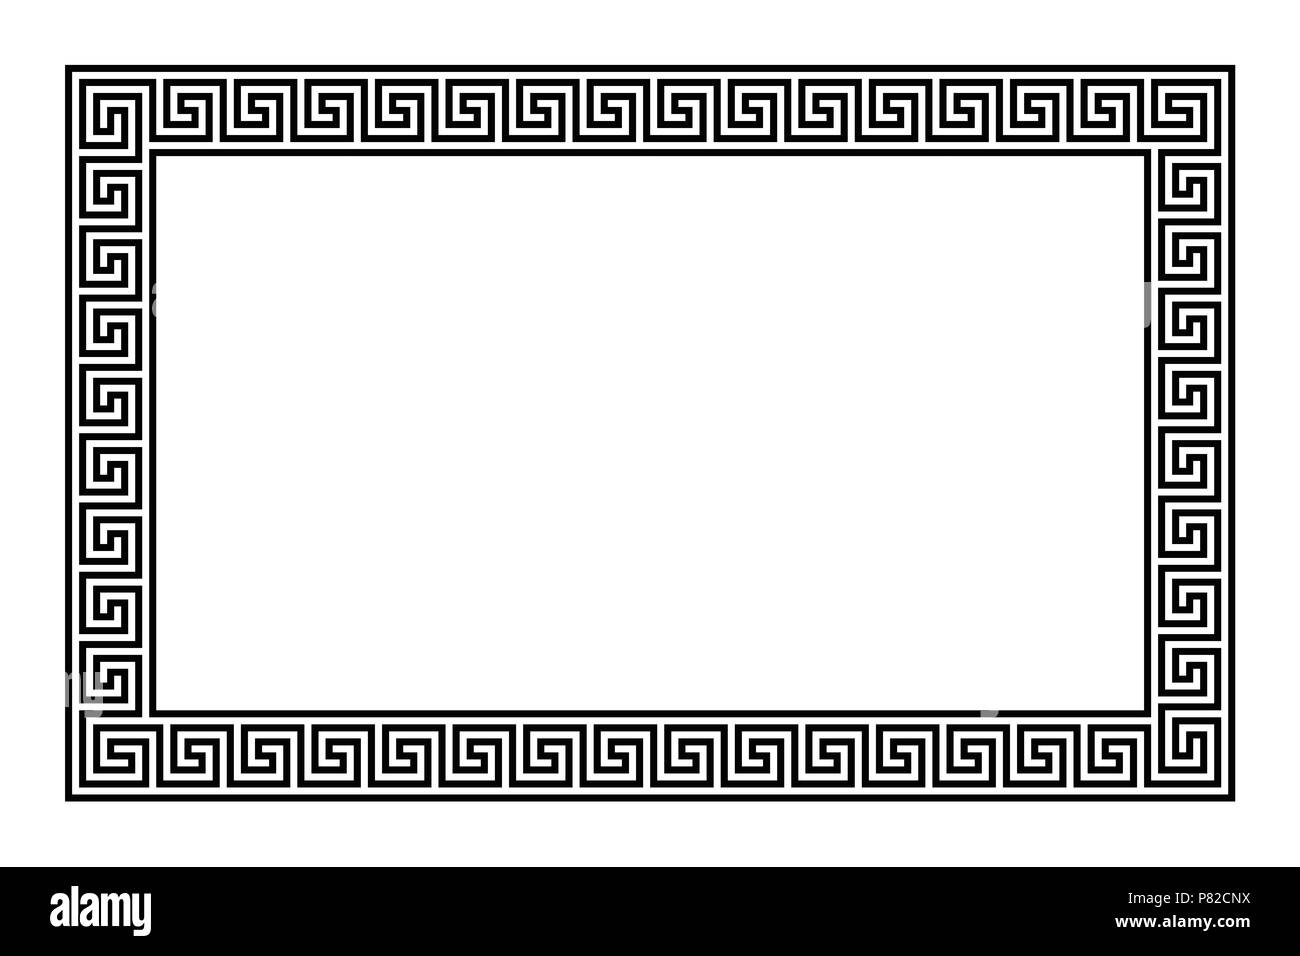 Rectangle frame with seamless meander pattern. Meandros, a decorative border, constructed from continuous lines, shaped into a repeated motif. Stock Photo